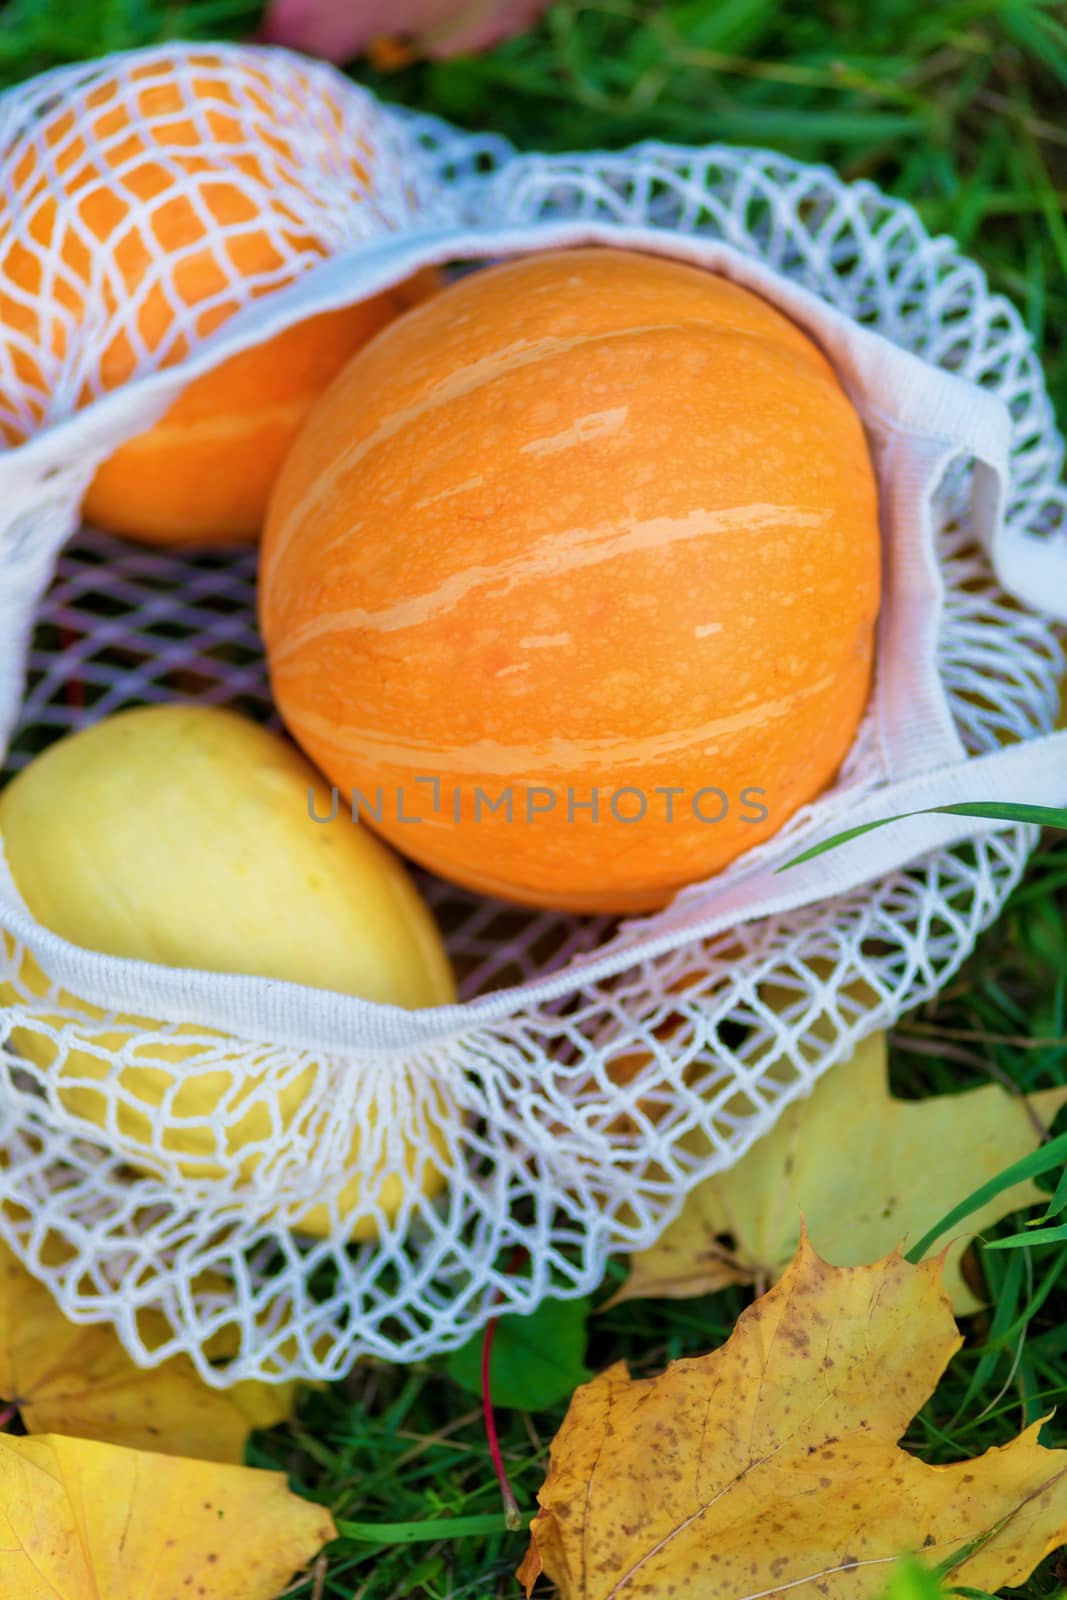 Pumpkins in reusable shopping mesh bag on autumn leaves background. by galinasharapova